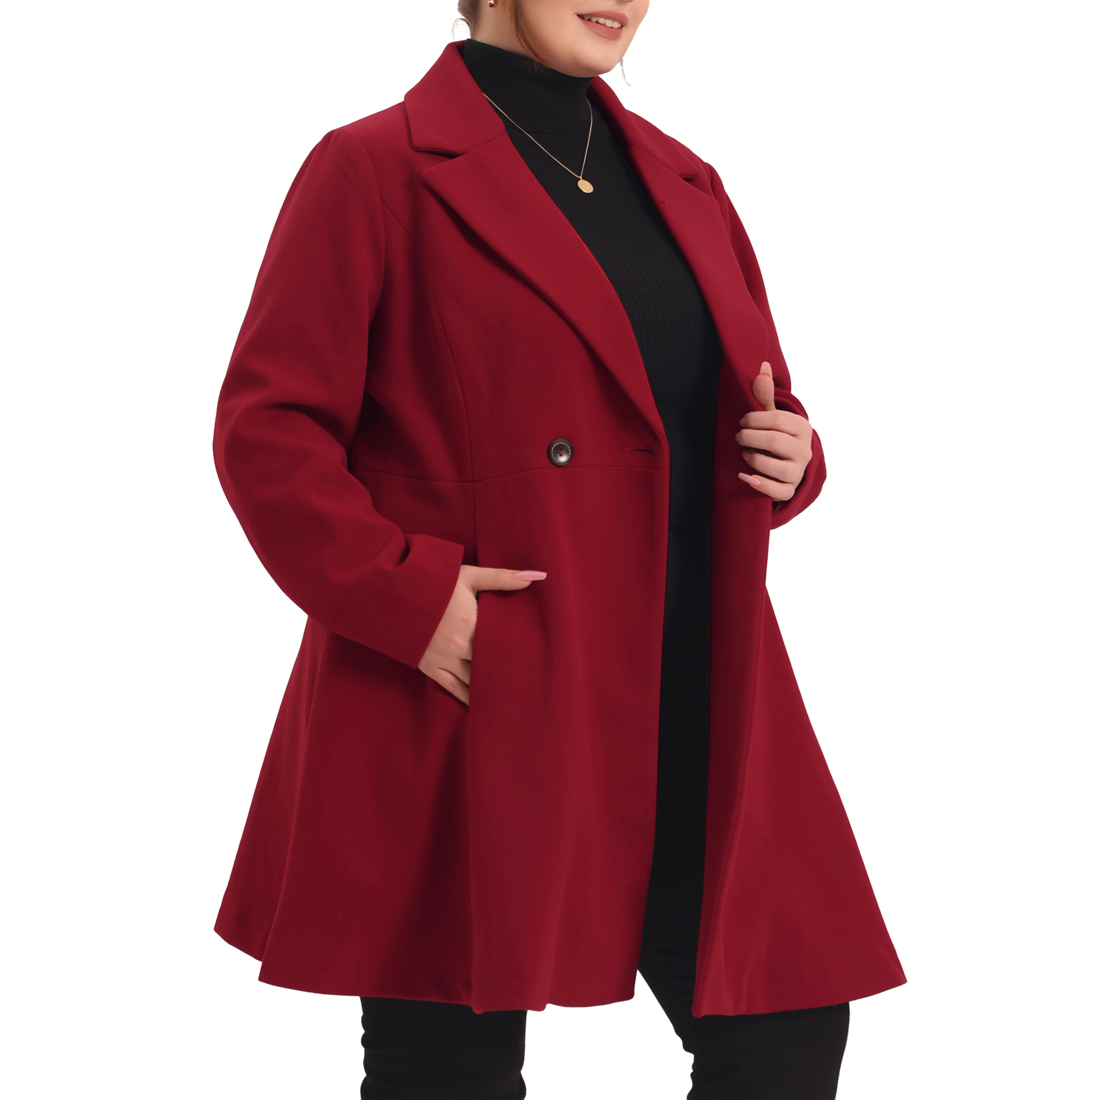 Unique Bargains Plus Size Peacoat for Women Elegant Notched Lapel Double Breasted Long Wool Trench Coat